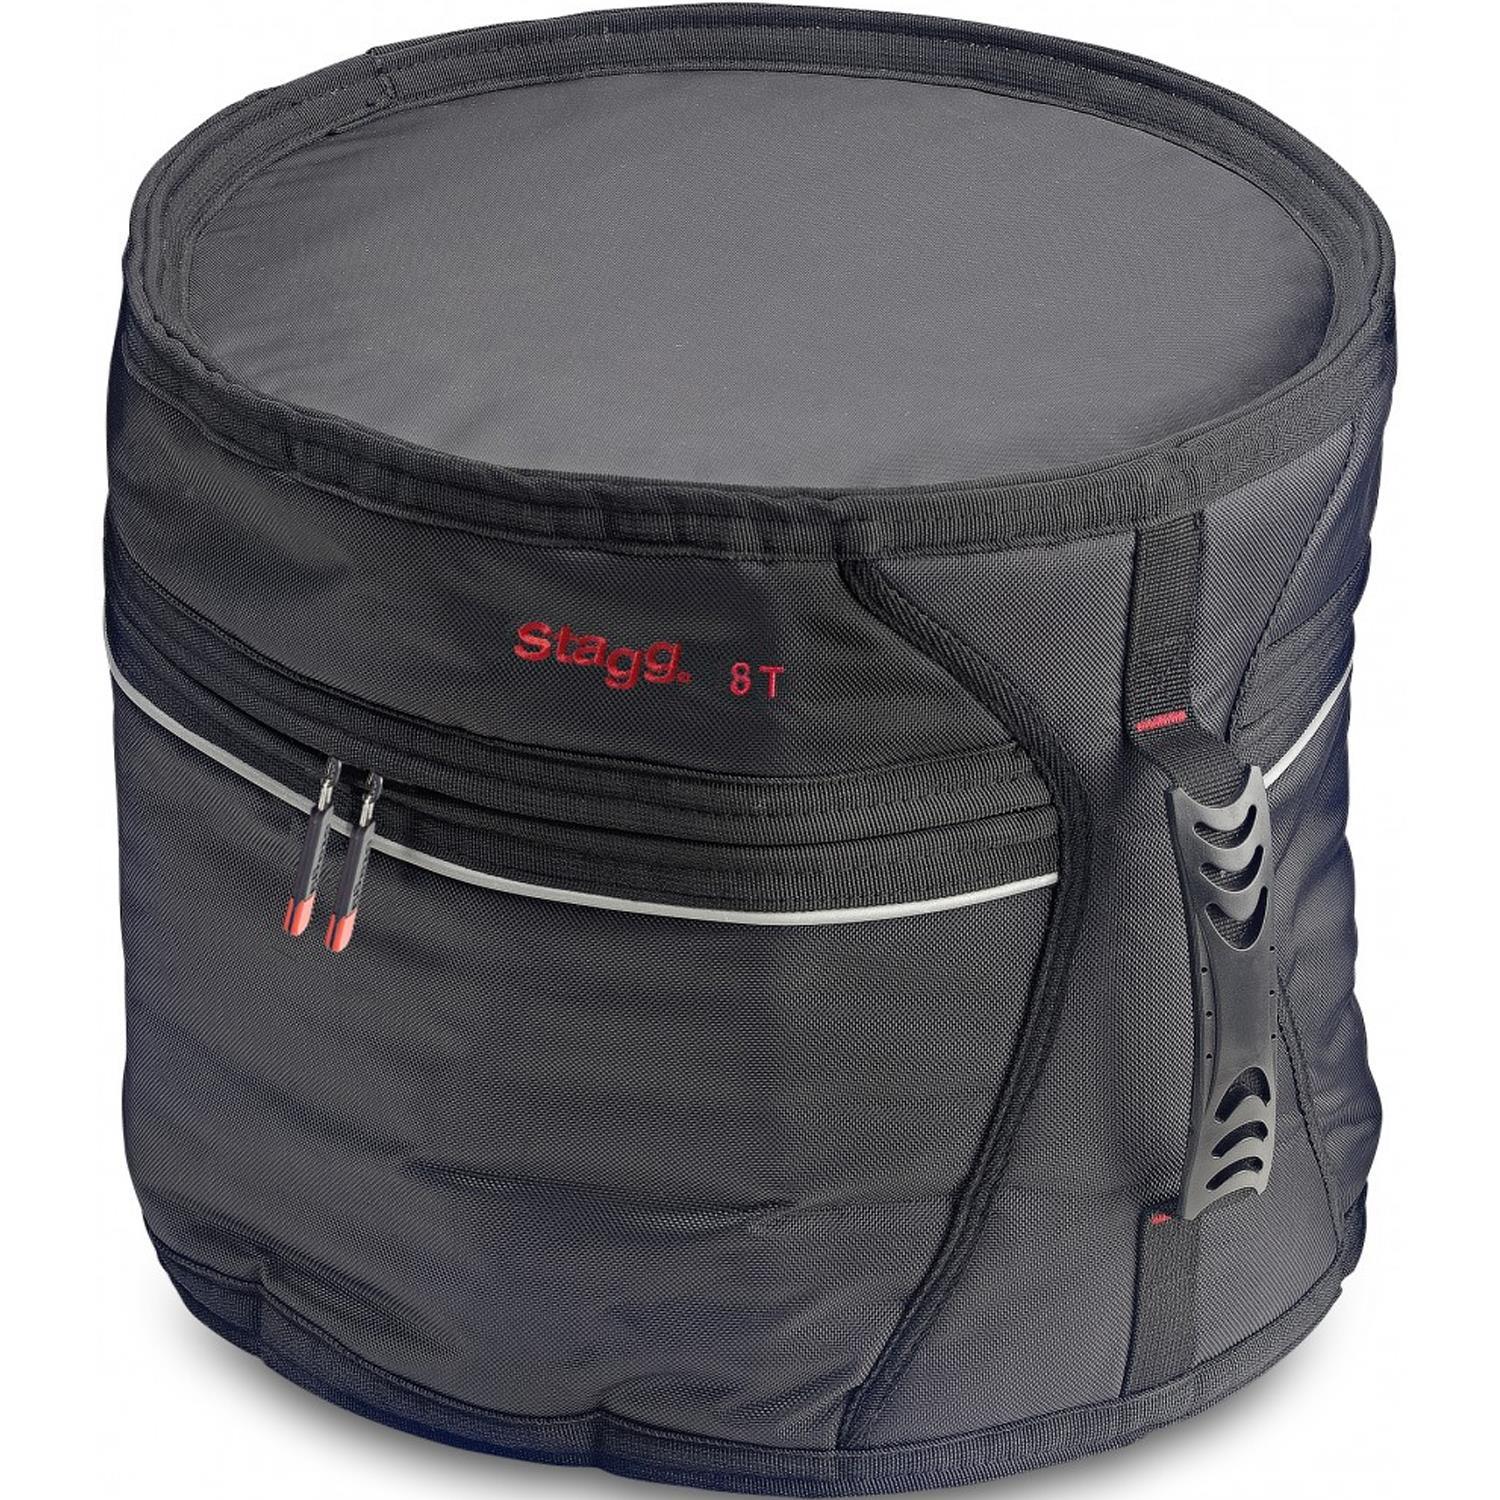 Stagg STTB-8 Professional 8" Tom Drum Case - DY Pro Audio